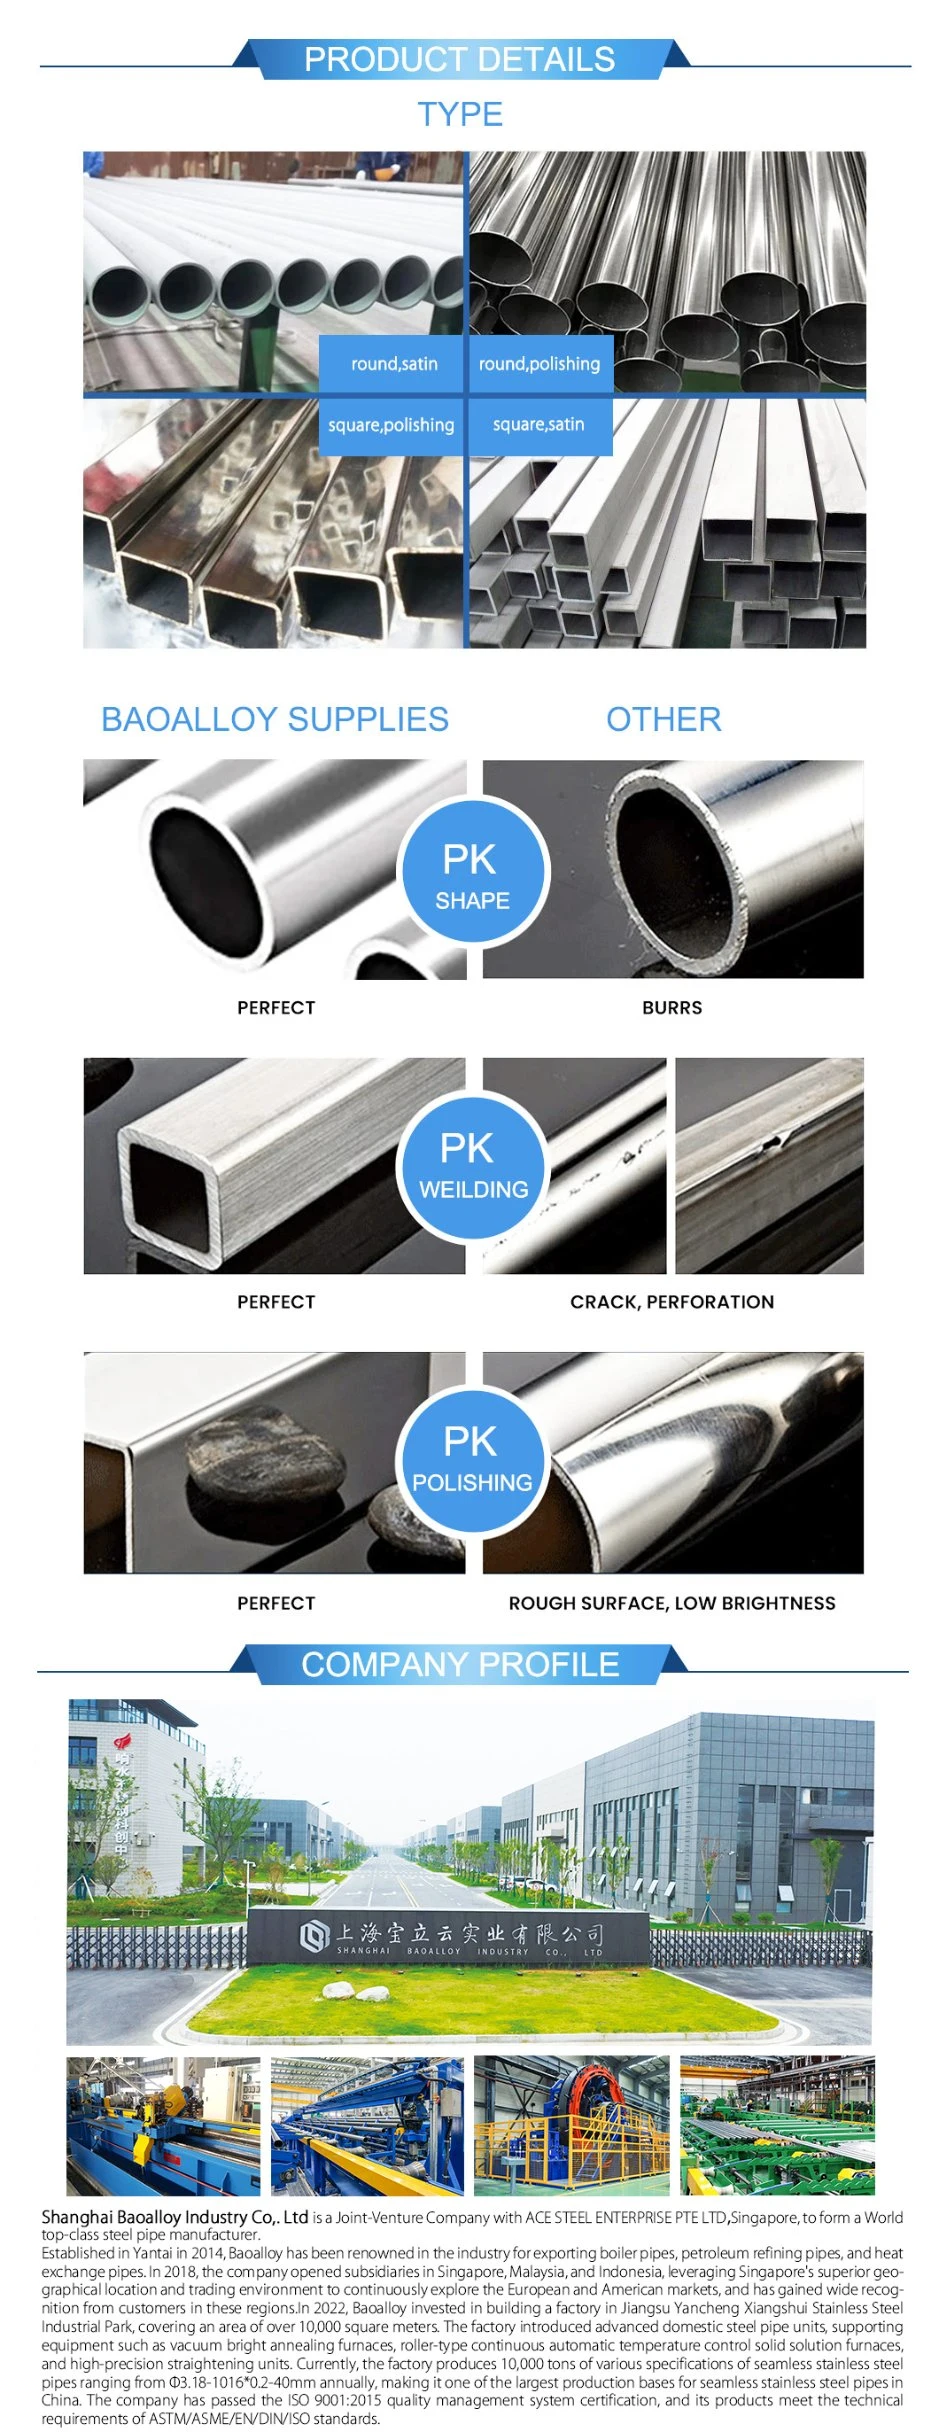 Stainless Steel Pipe/Tube 410 Pipe Stainless Steel Seamless Pipe/Weld Pipe/Tube 410 Pipe